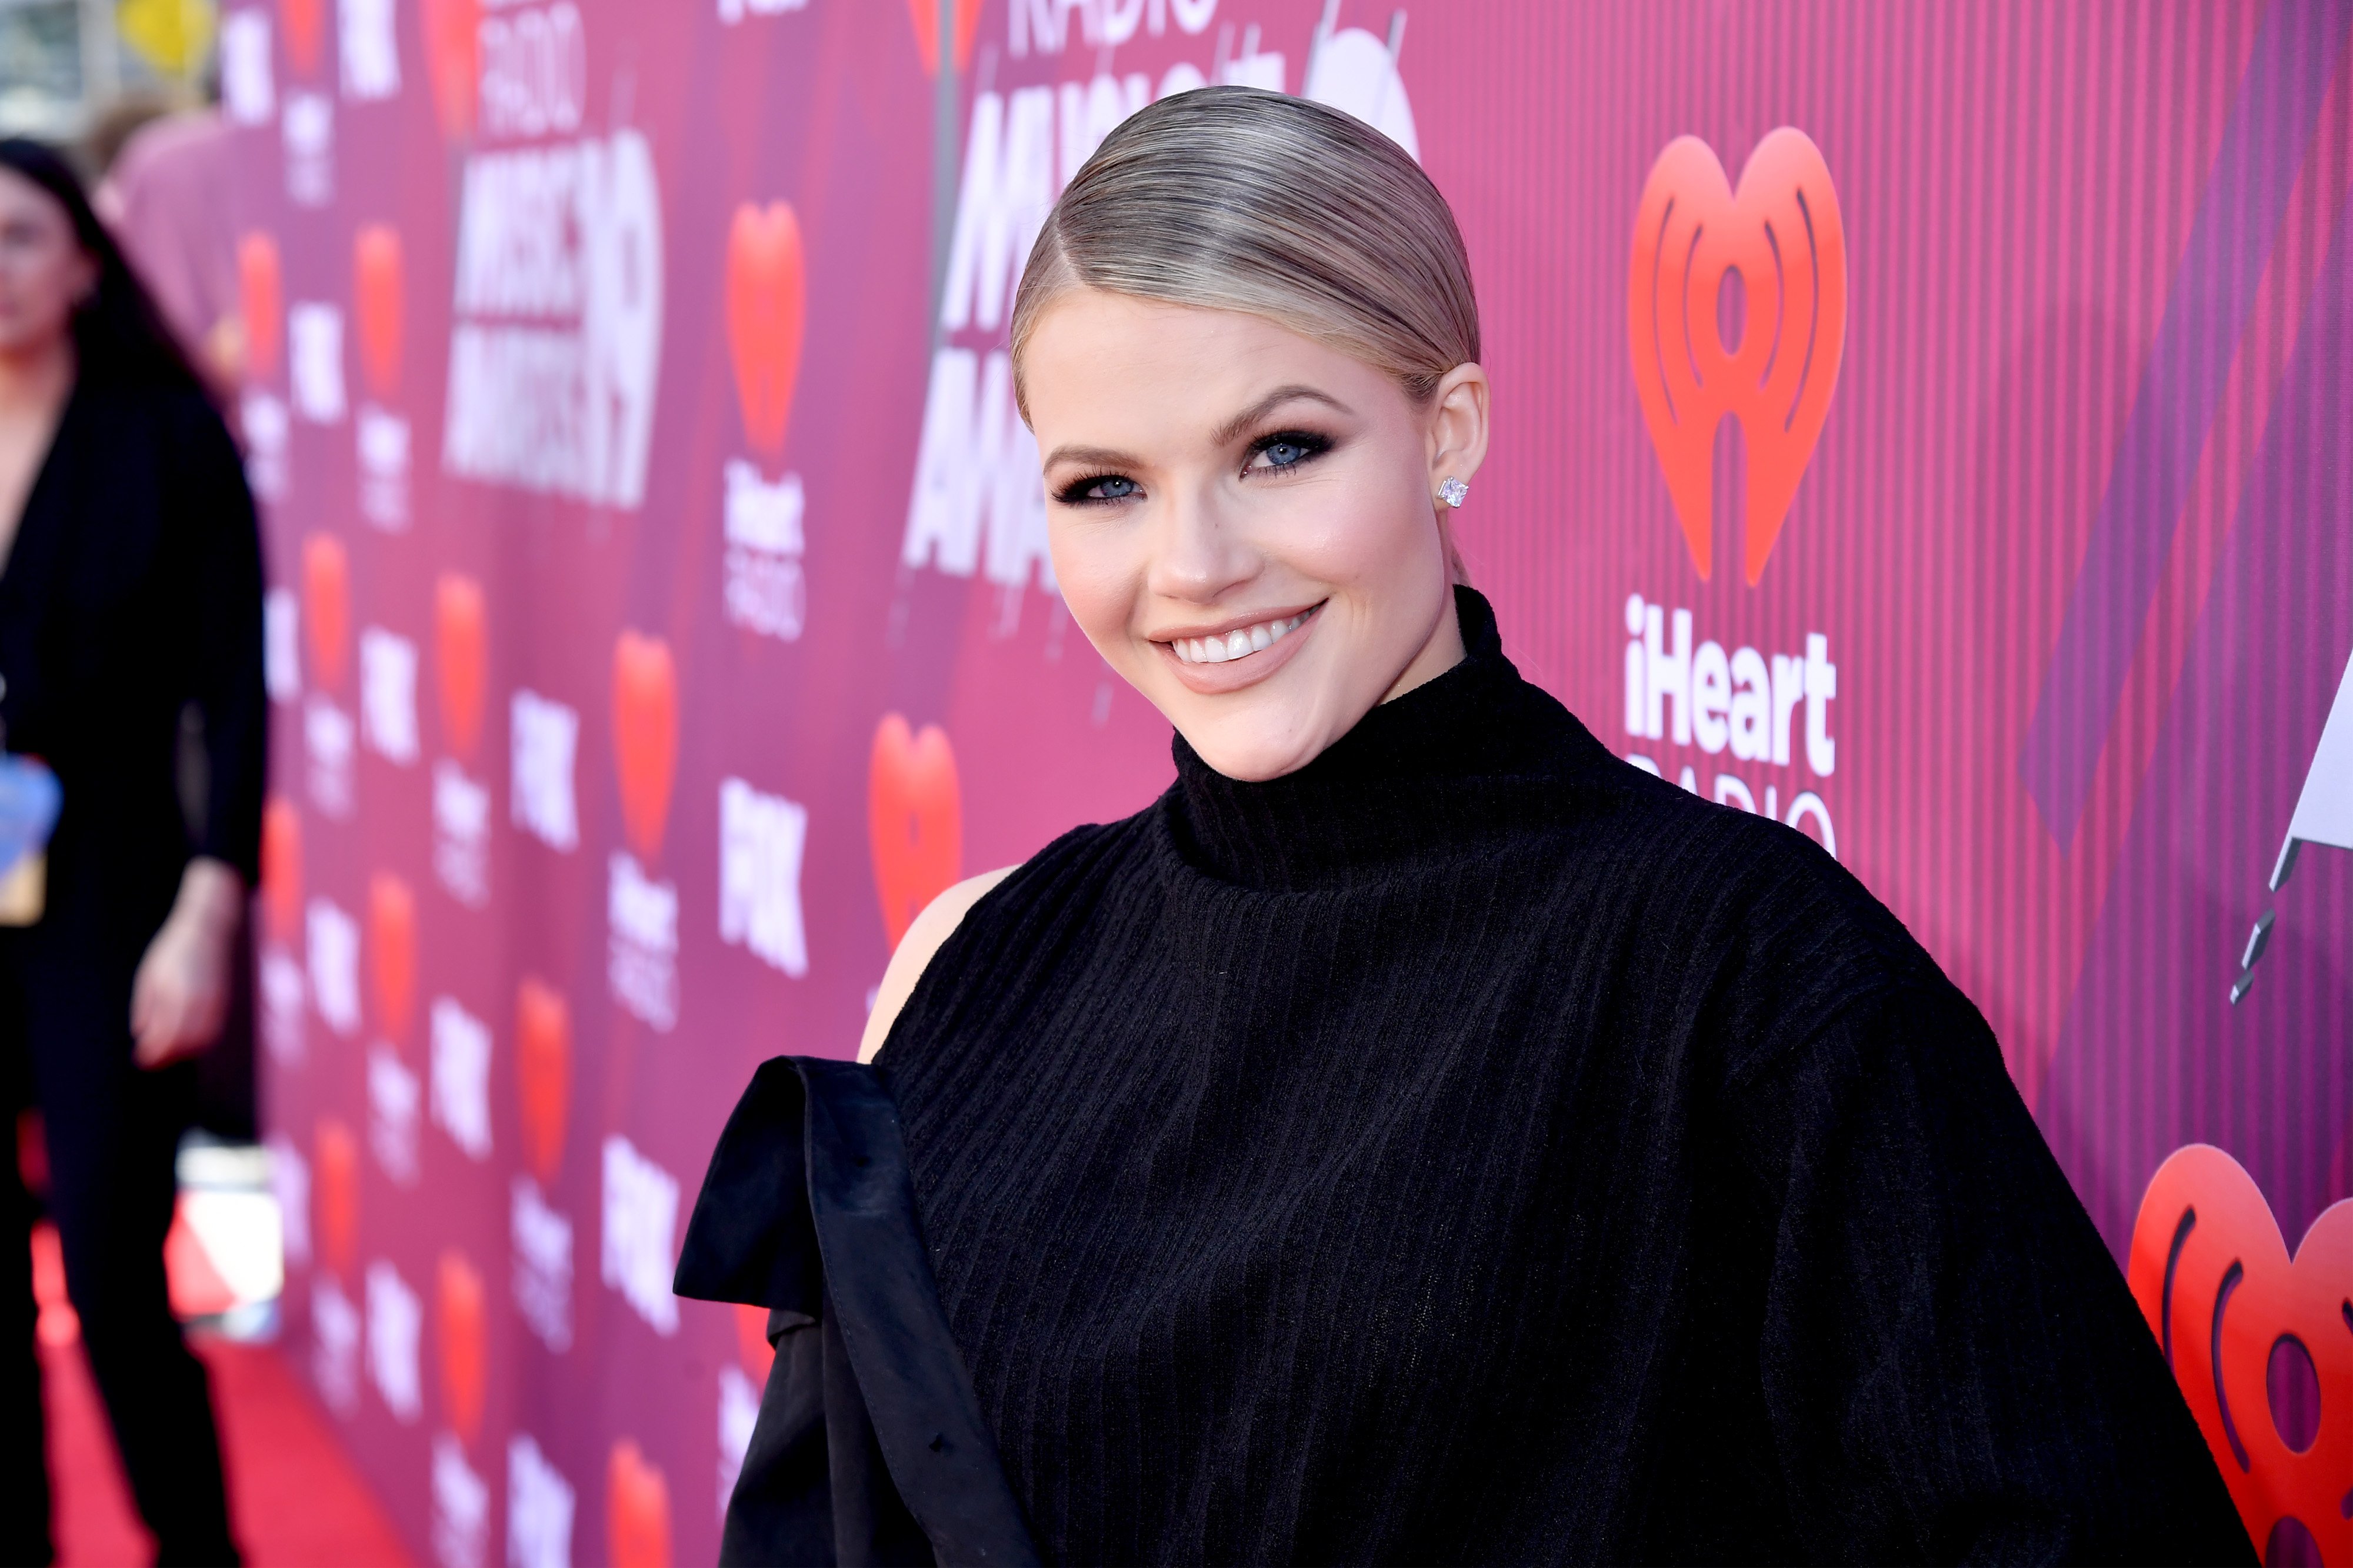 Witney Carson attends the 2019 iHeartRadio Music Awards on March 14, 2019, in Los Angeles, California. | Source: Getty Images.